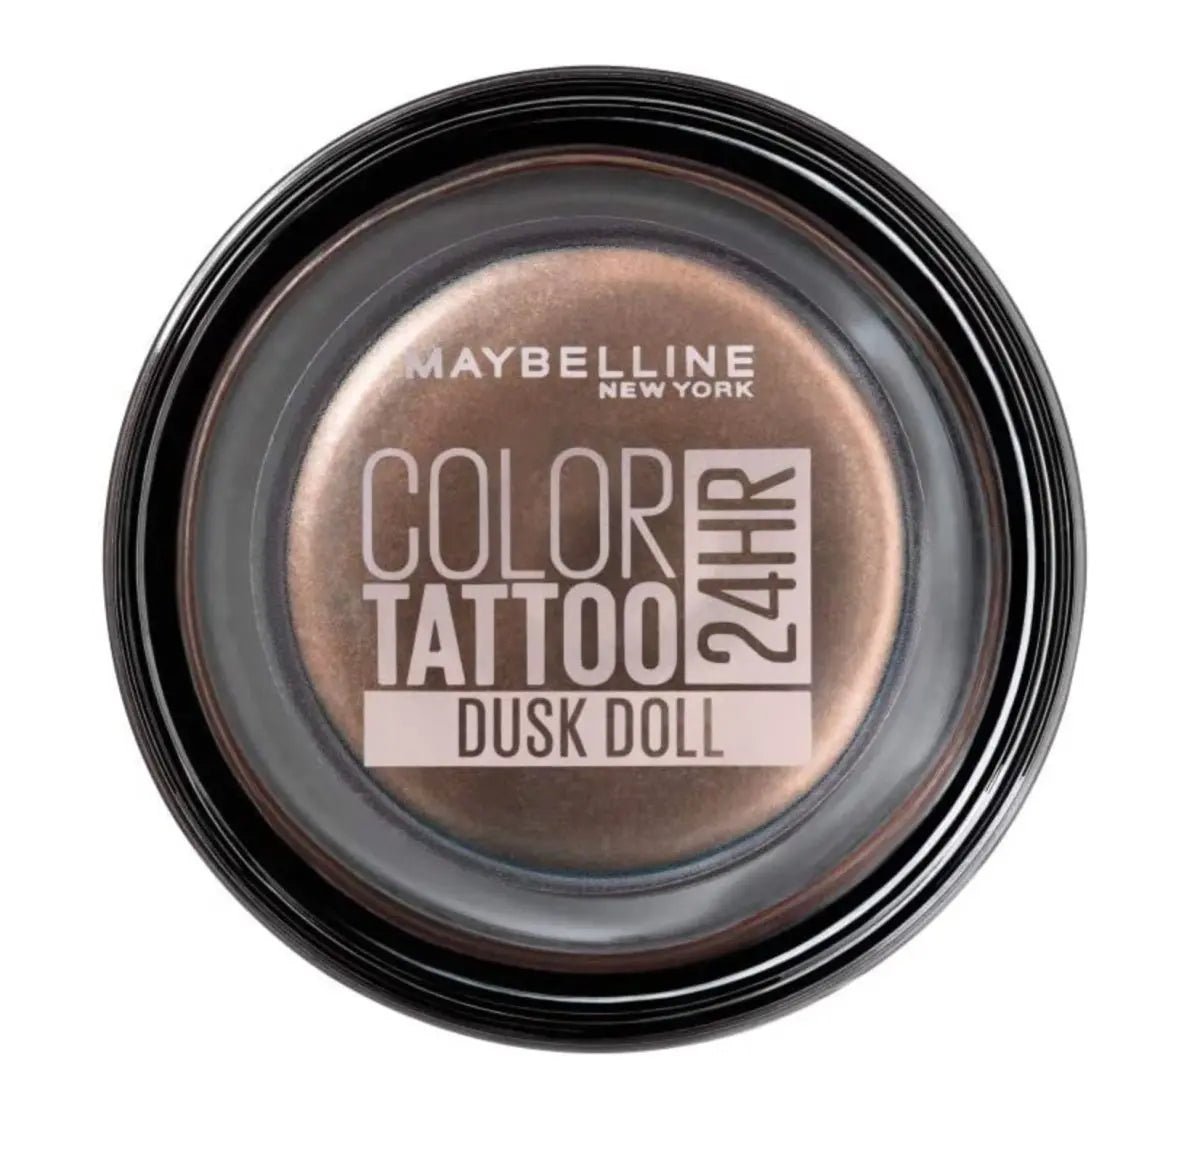 Image of Maybelline Color Tattoo Eyeshadow 24H - Dusk Doll